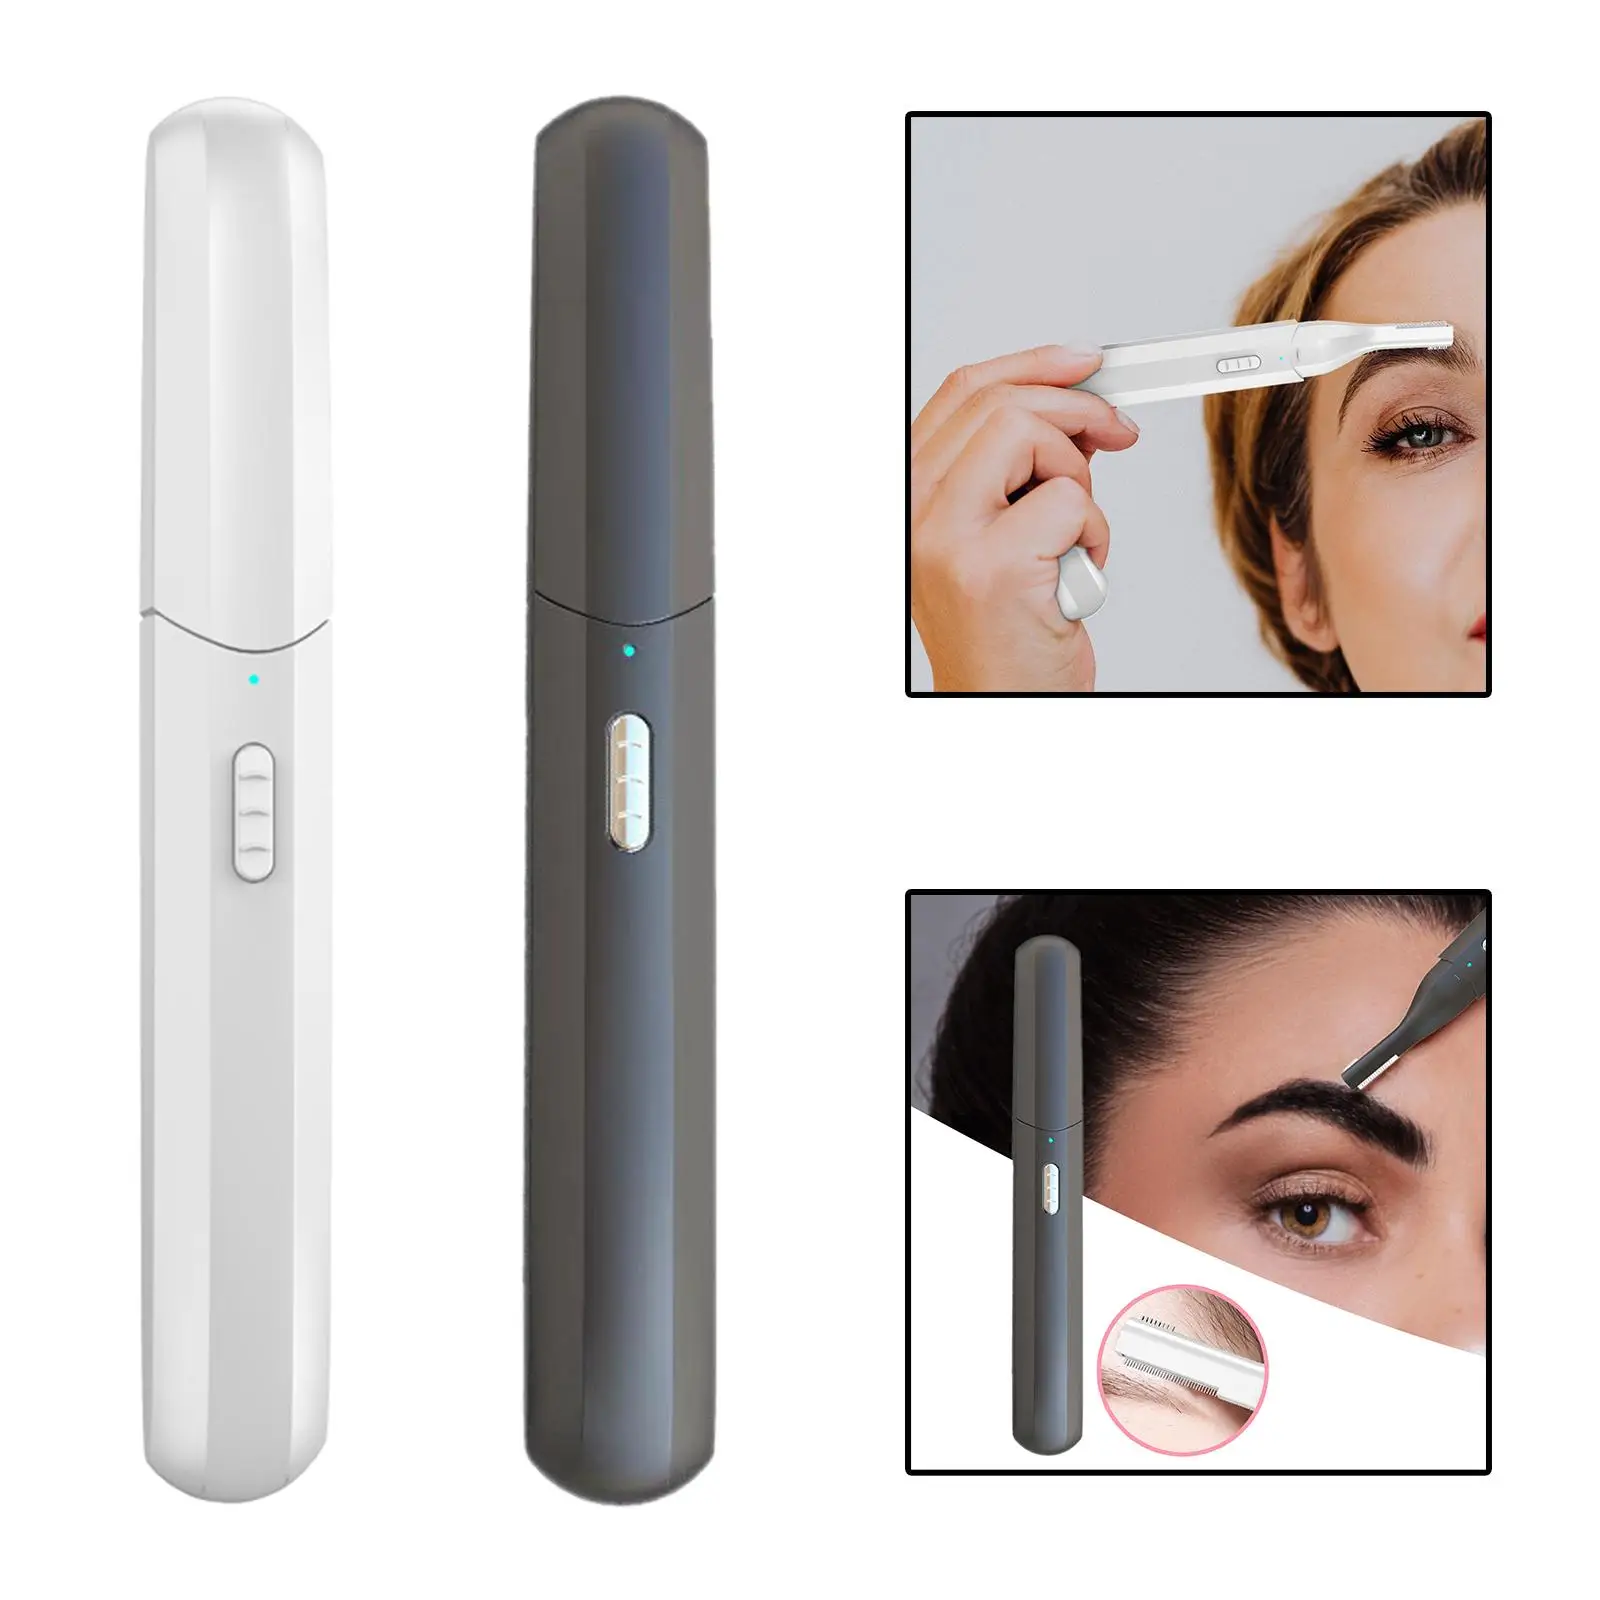 USB Charging Electric Eyebrow trimming Hair Remover Scrtachproof with Dual Cutter Head Portable for Lips Arms Legs